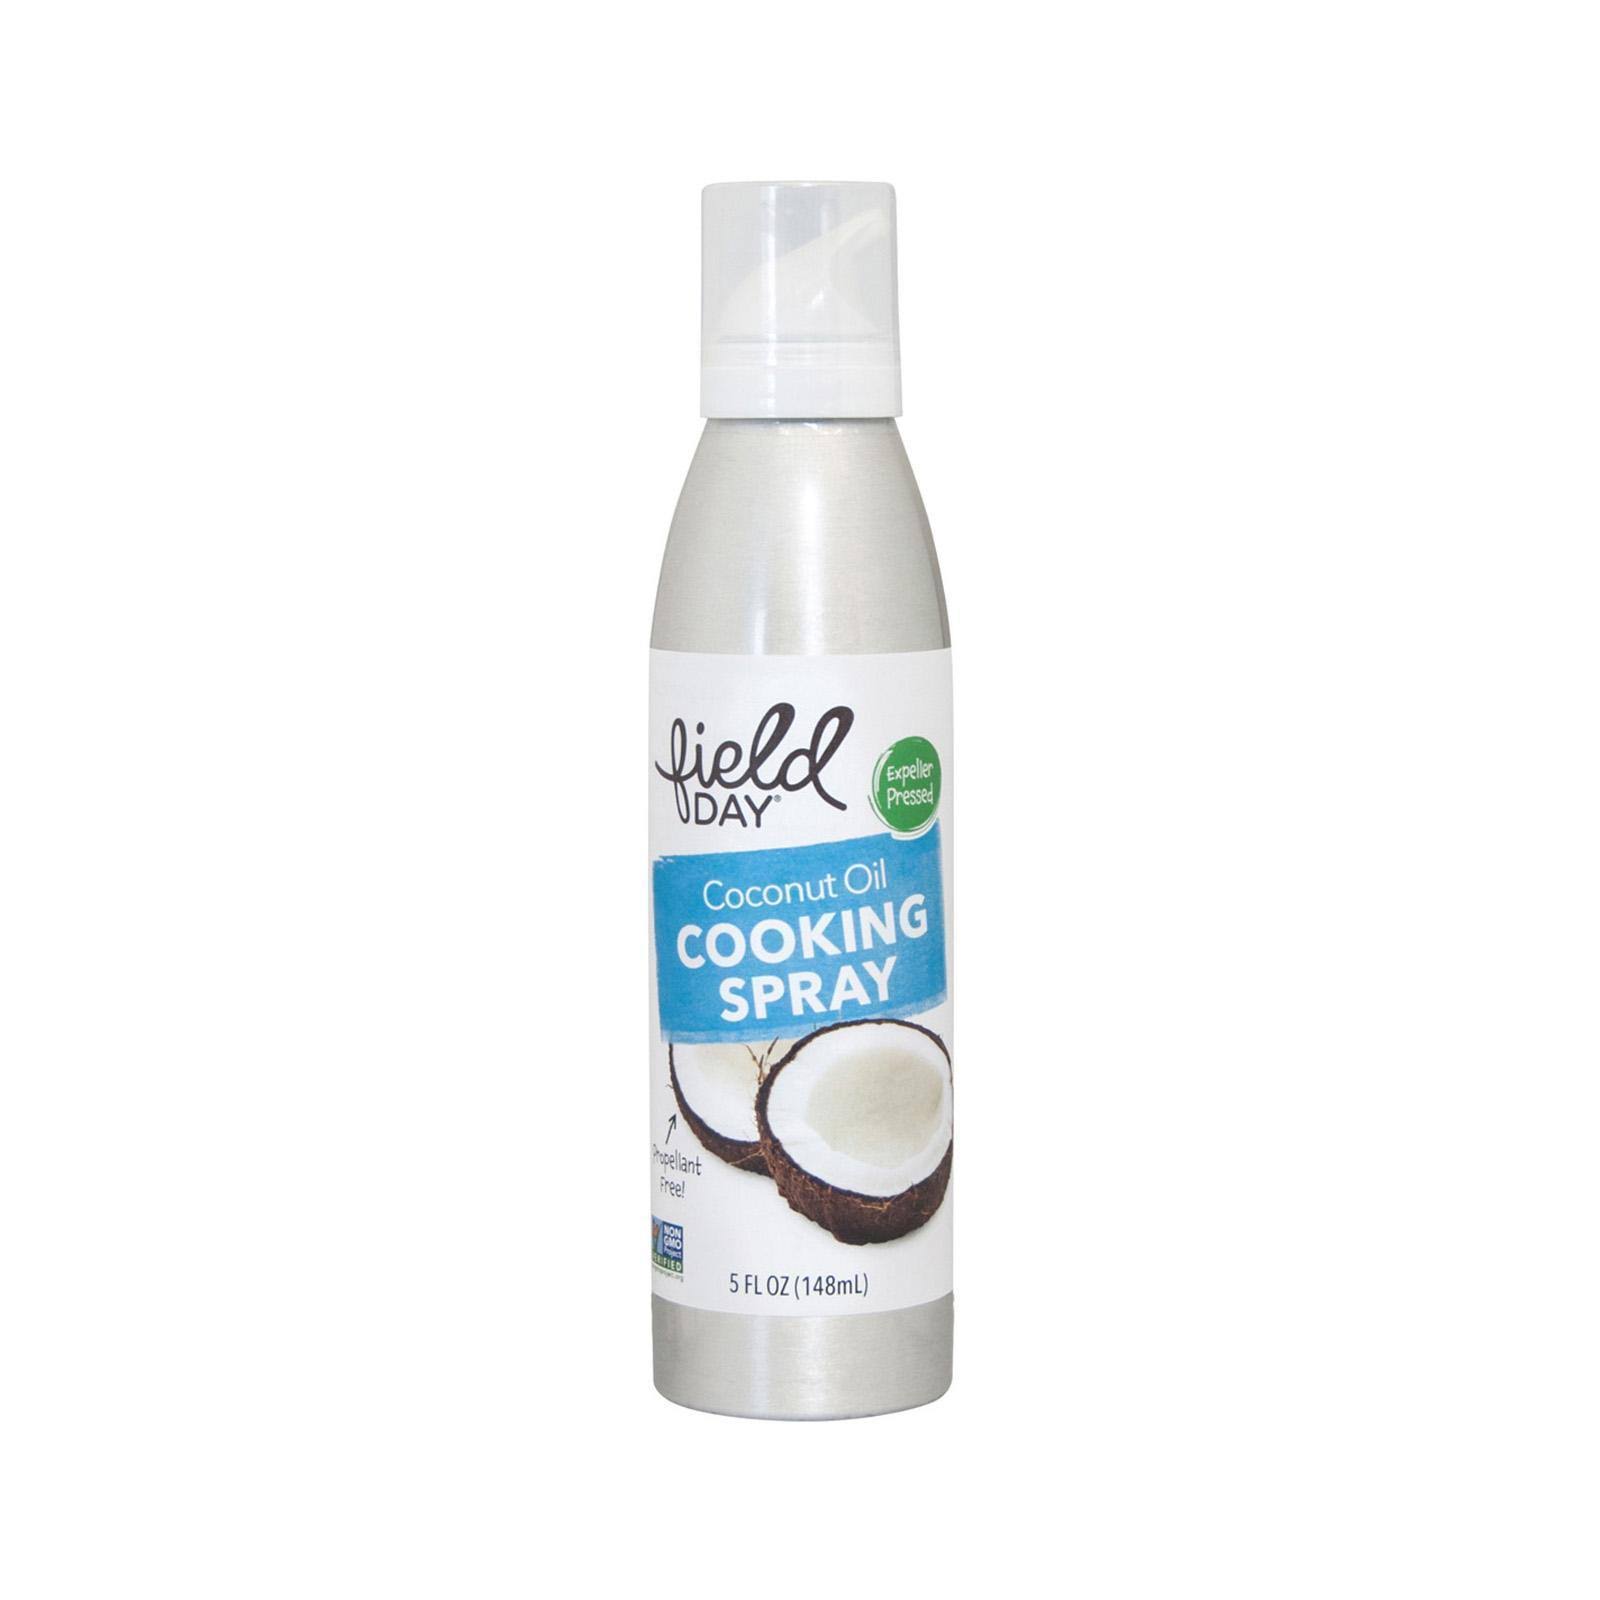 Field Day 1792035 5 oz Coconut Oil Cooking Spray, Case of 6